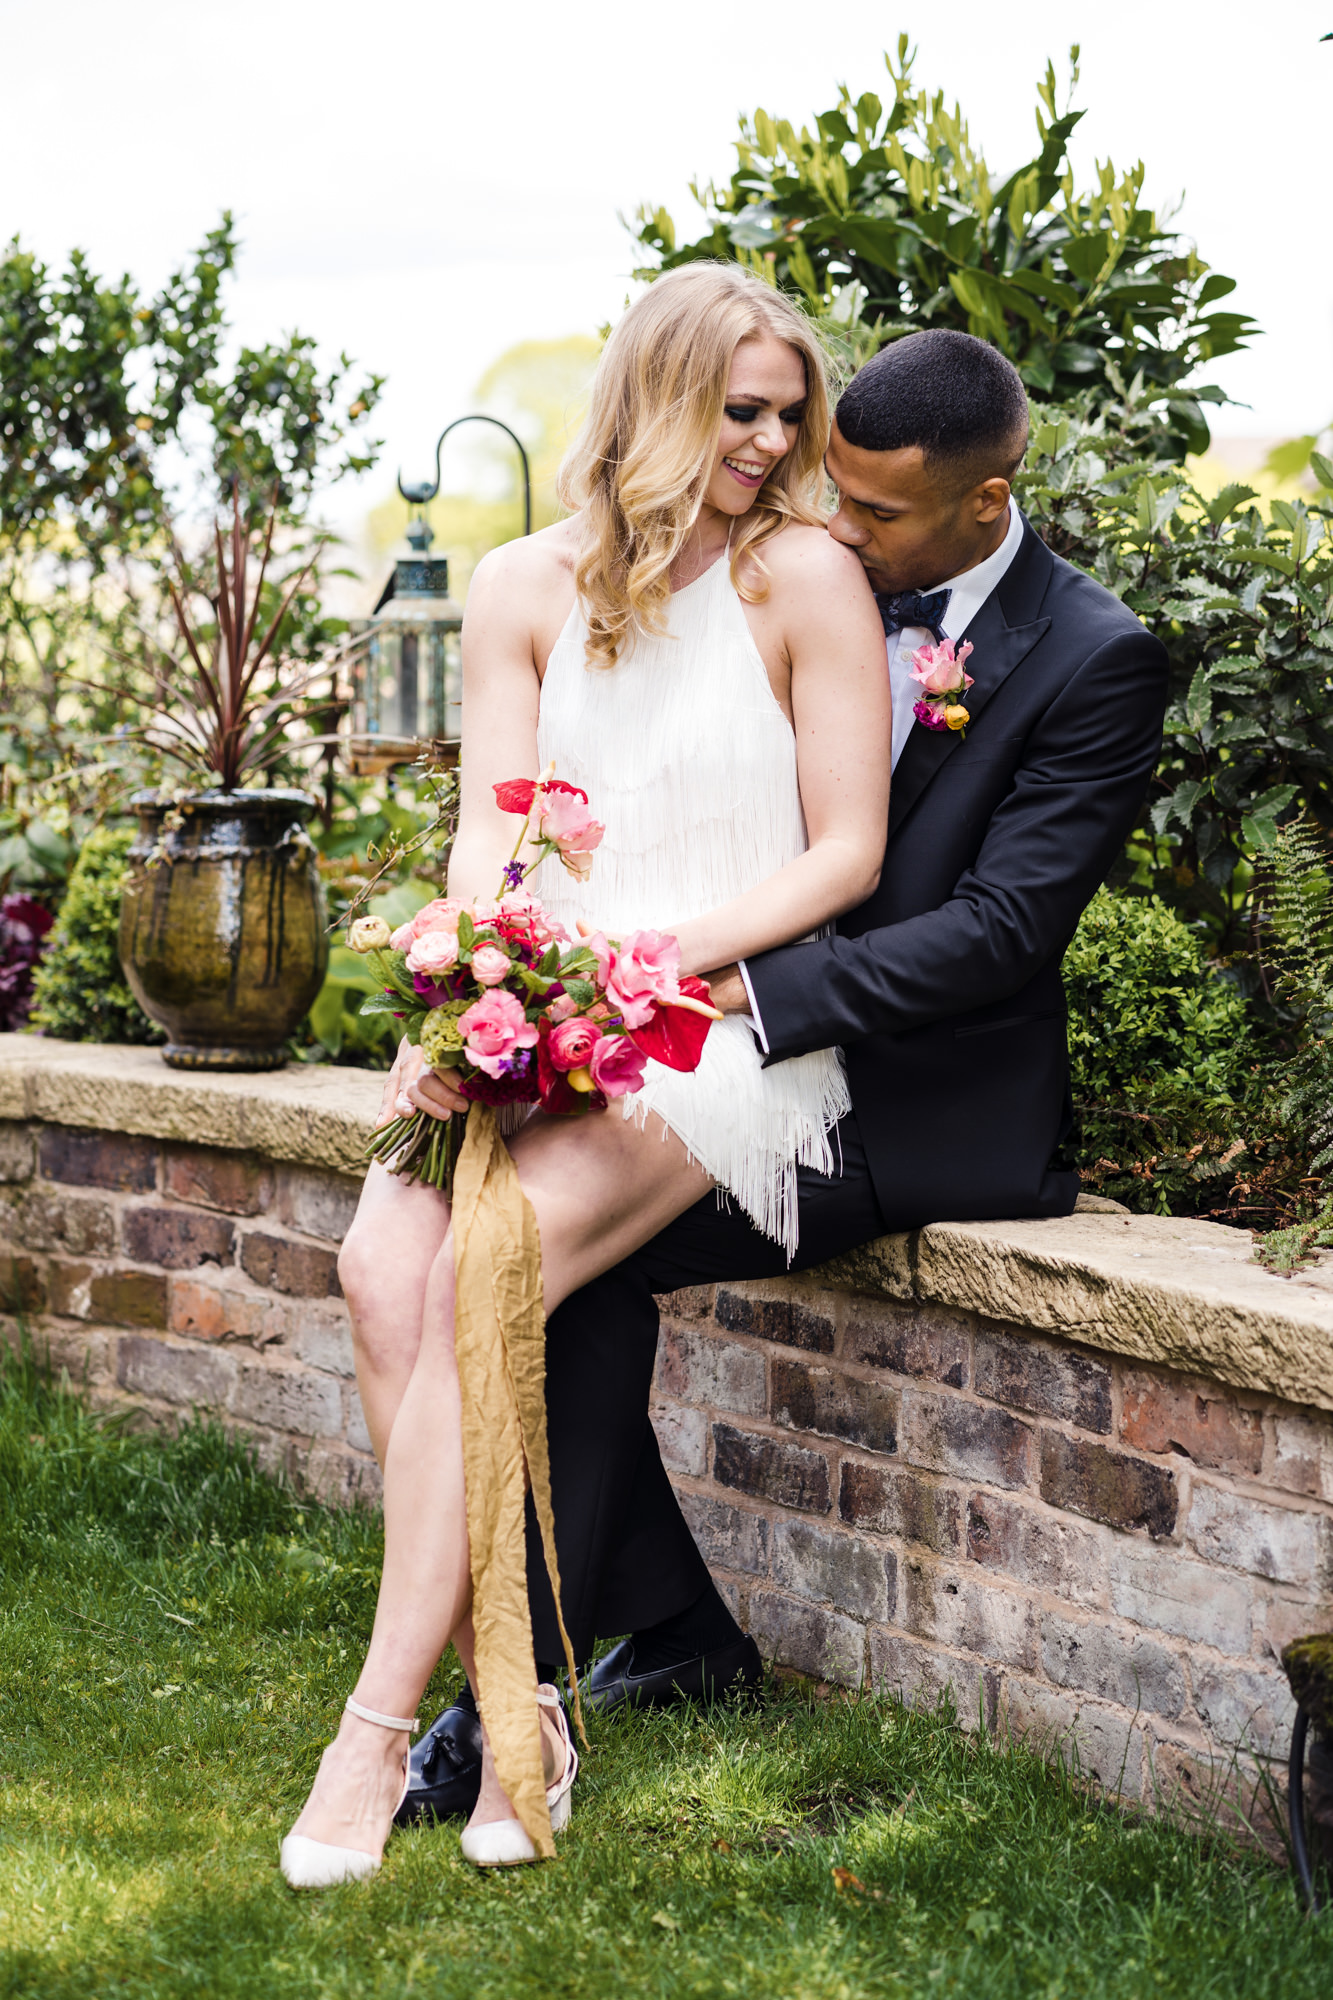 groom sits on a wall while bride sits on his lap and he tenderly kisses her shoulder. bride is holding a bold colourful floral bouquet